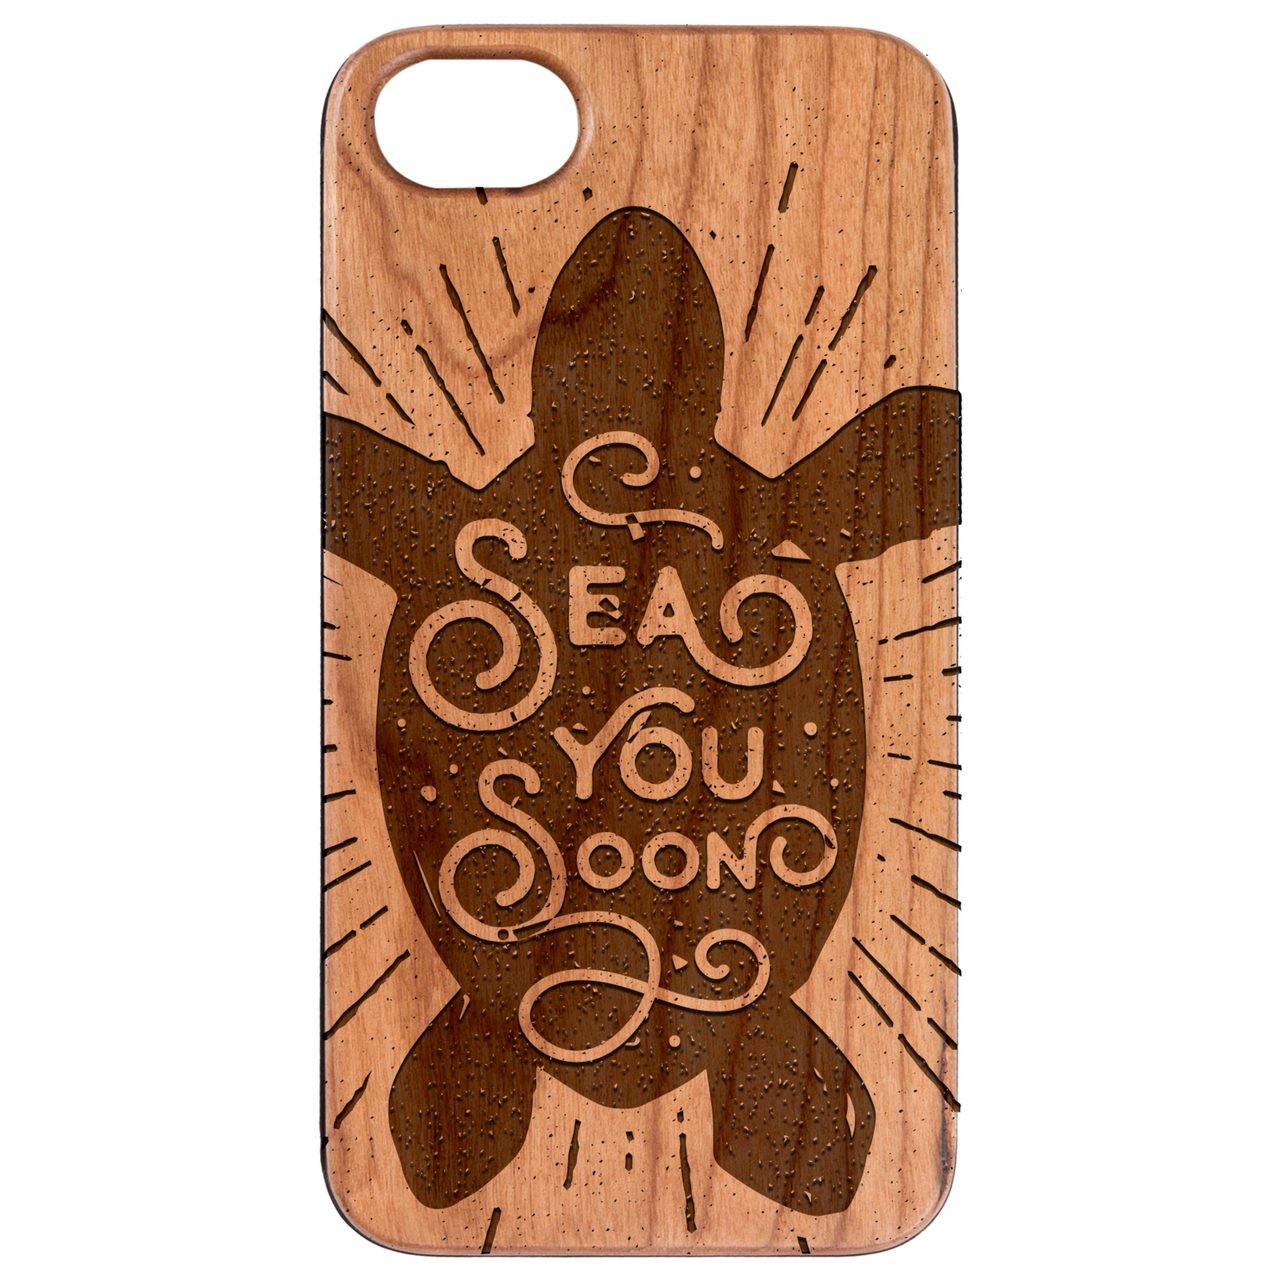  Sea You Soon - Engraved - Wooden Phone Case - IPhone 13 Models